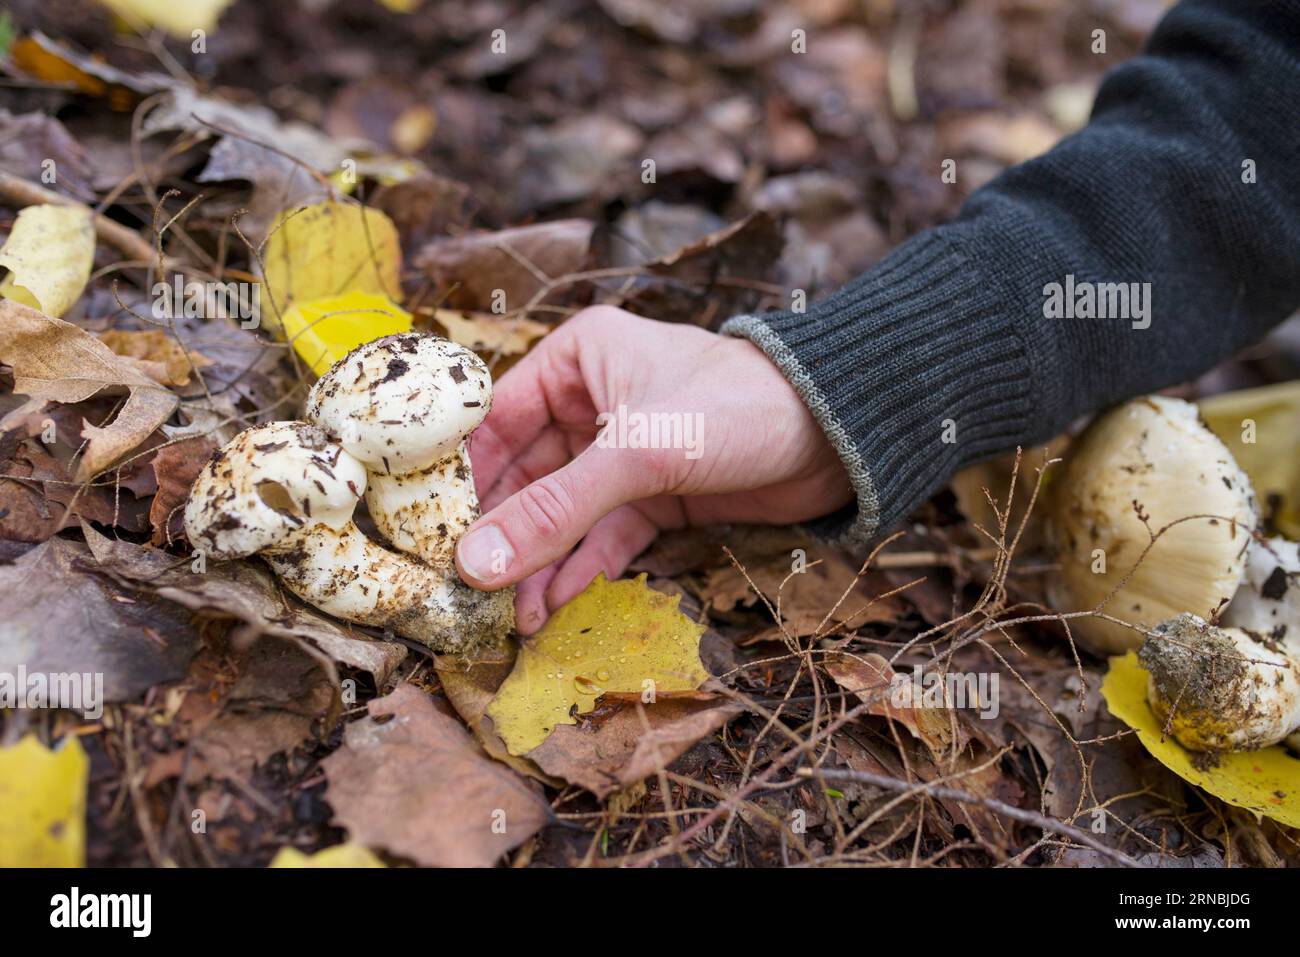 A man holding foraged matsutake mushrooms in the forest Stock Photo